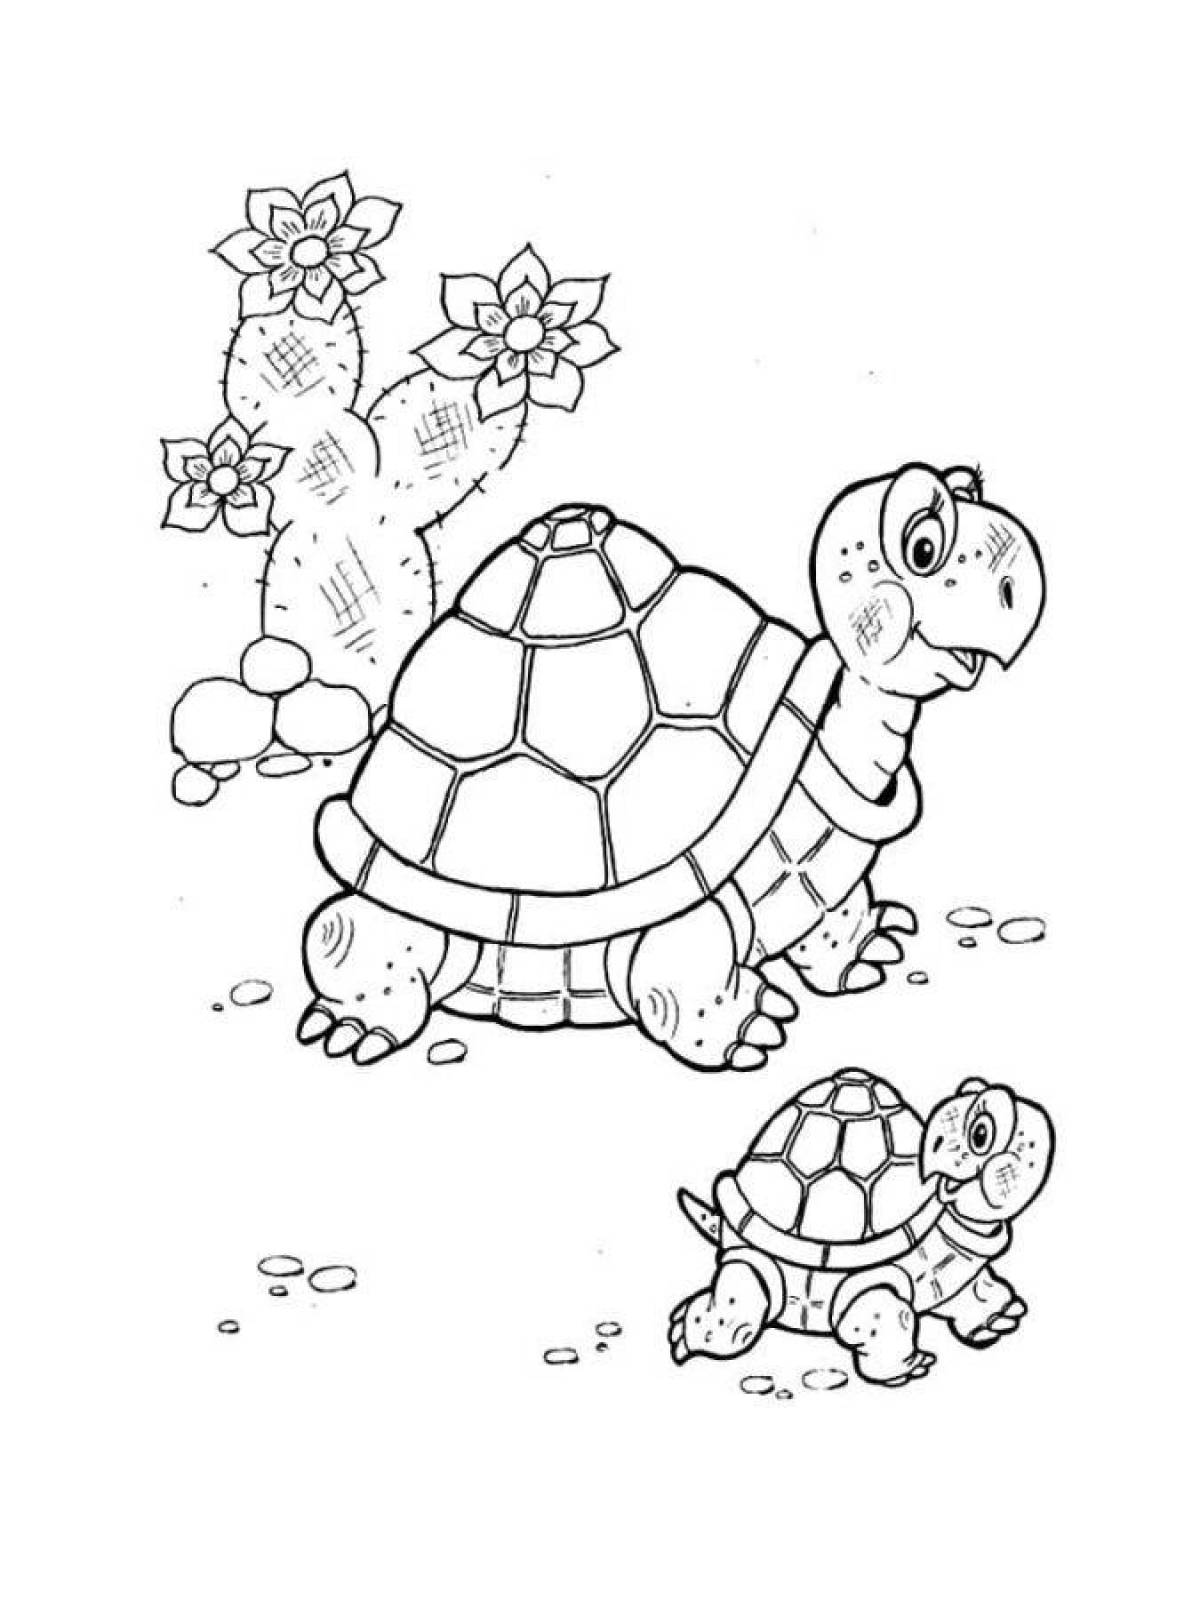 Major coloring pages animals of hot countries for preschoolers